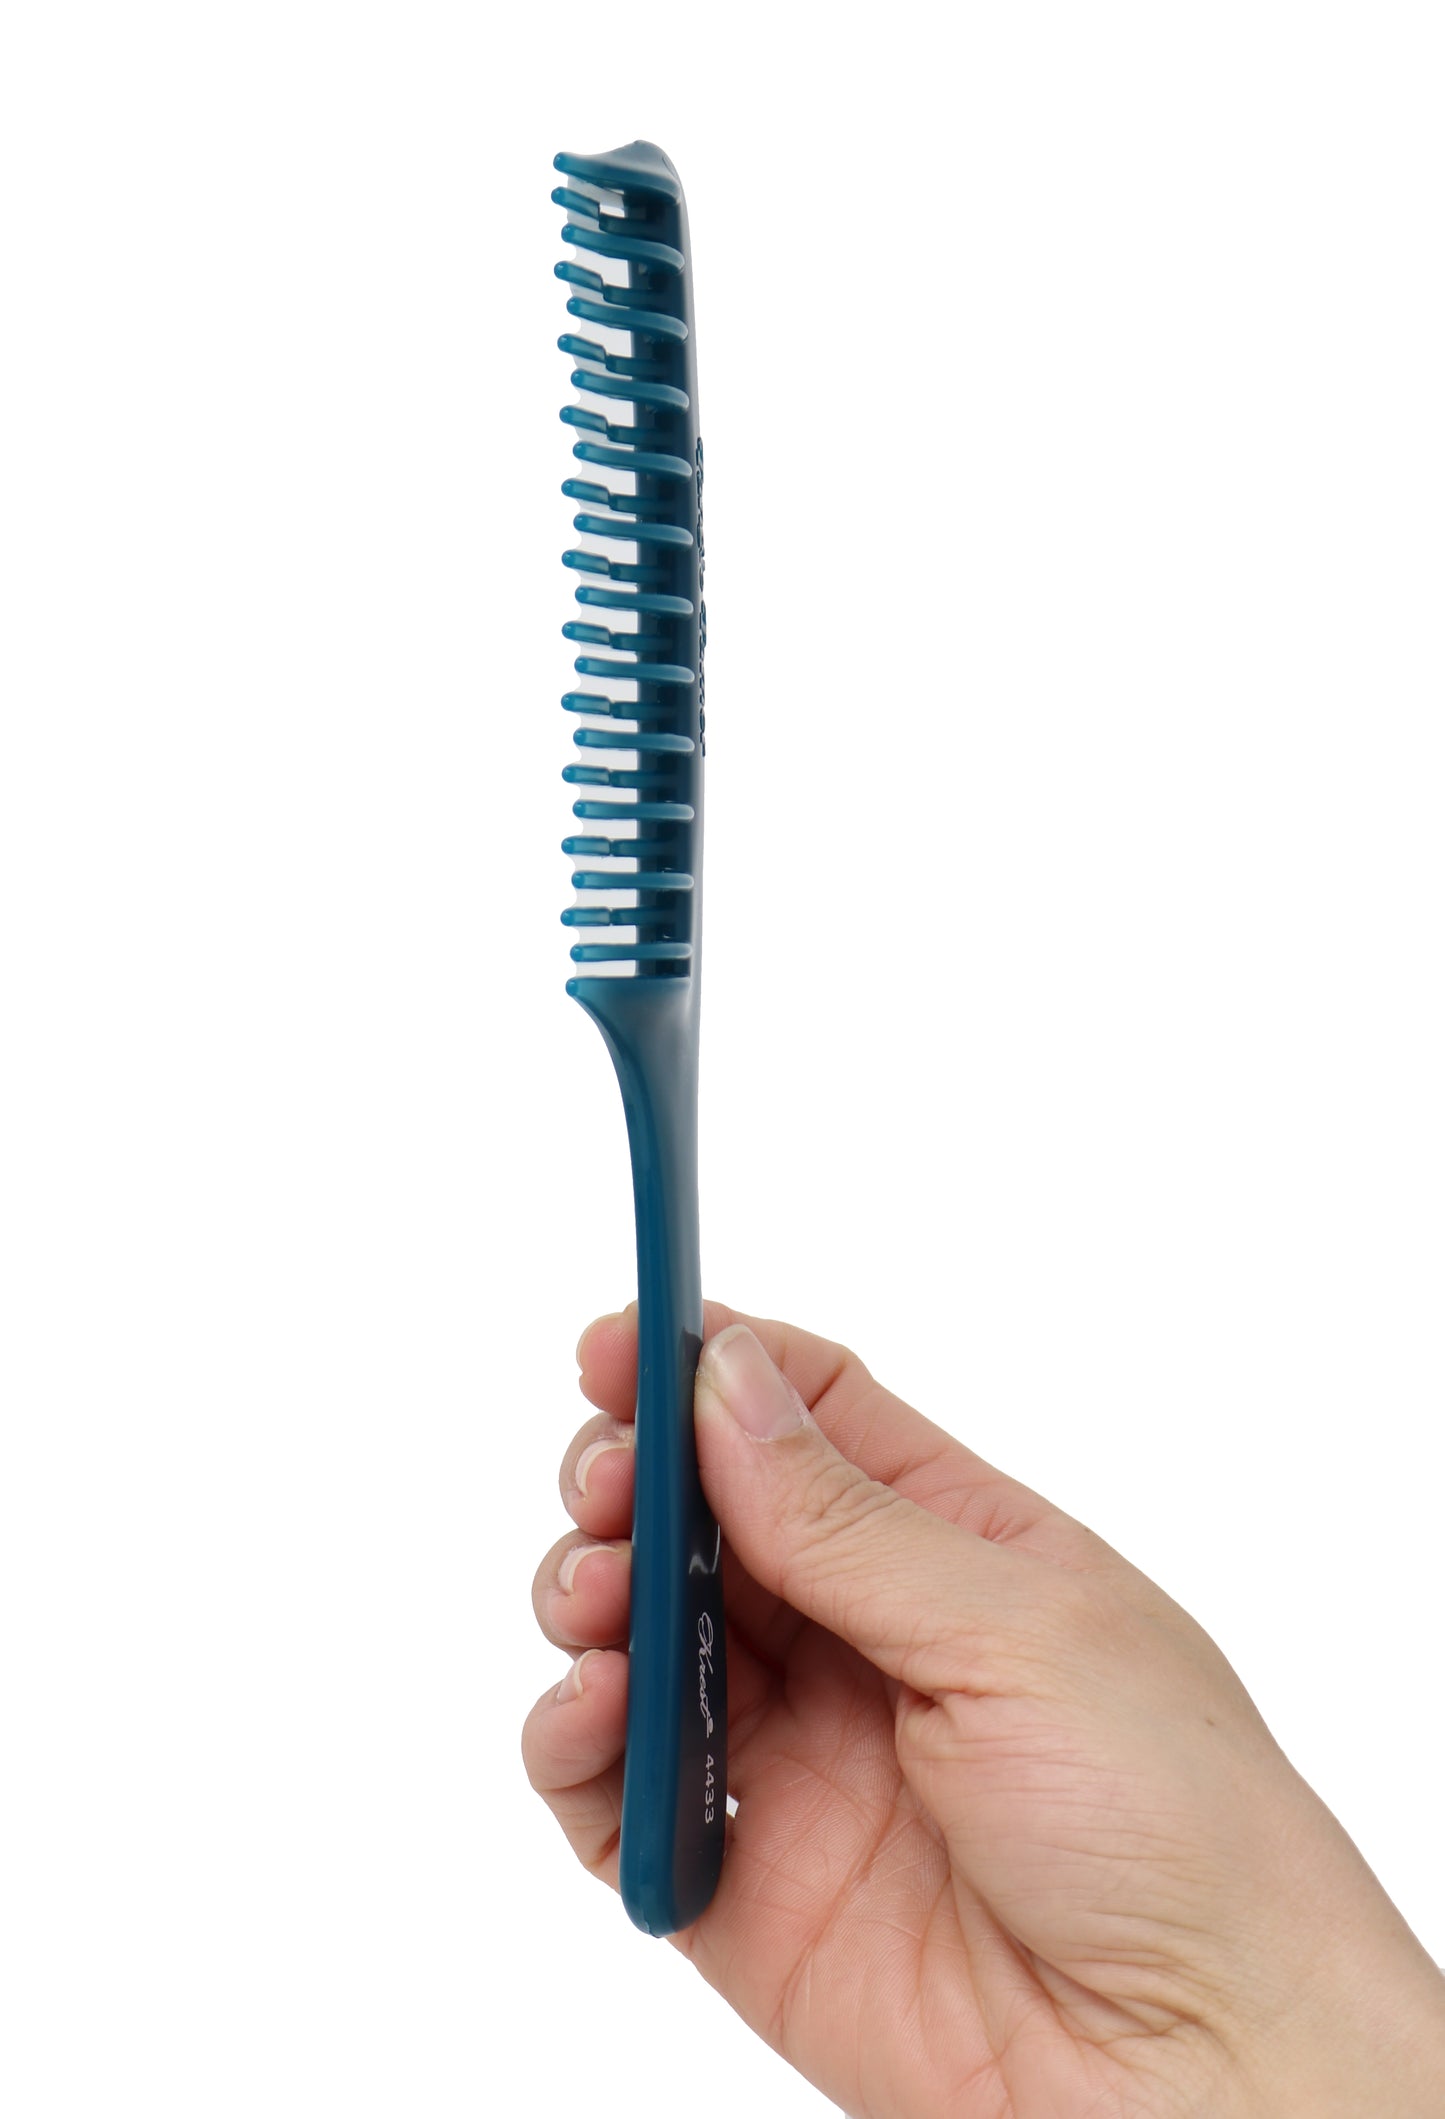 Krest Combs Teal Tangle Tamer Curved Tooth Comb Shampoo Comb Wide Curved Tooth With Handle